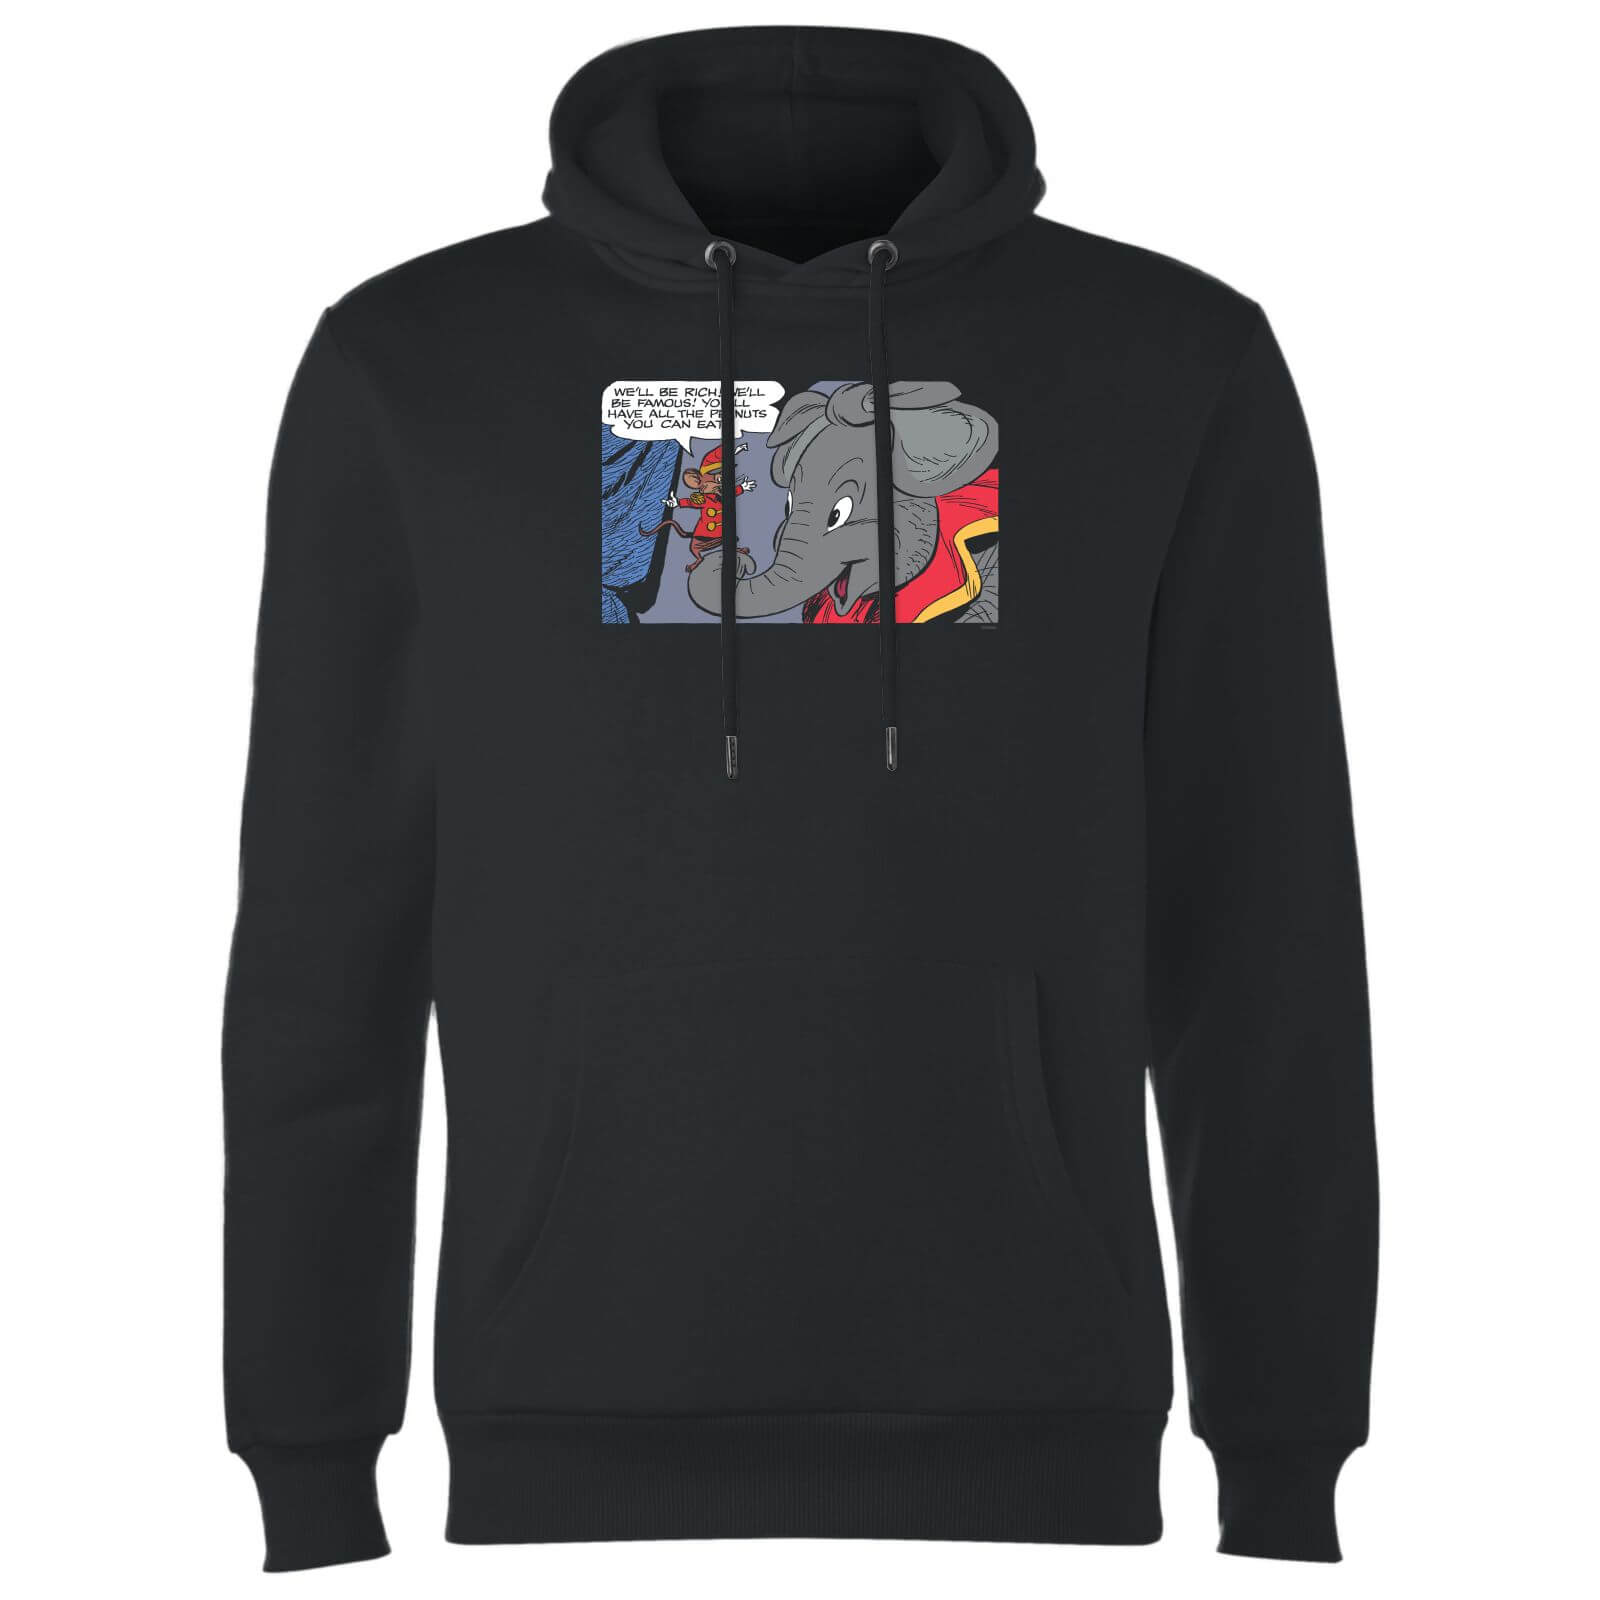 Dumbo Rich and Famous Hoodie - Black - S - Black